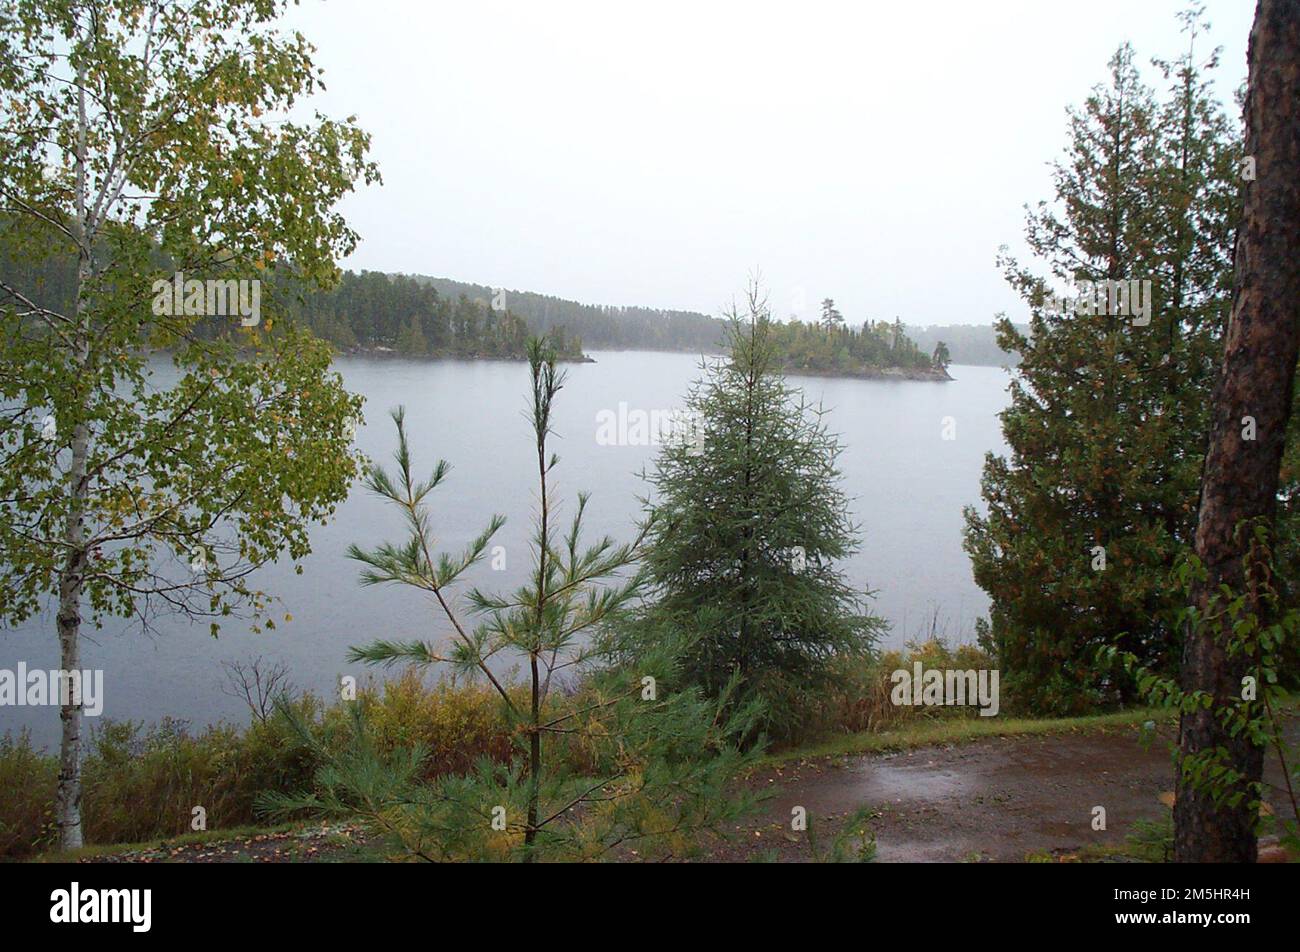 Gunflint Trail Scenic Byway - Seagull Lake. Trees frame a foggy morning view of a small island on Seagull Lake. Seagull Lake, Minnesota (48.140° N 90.874° W) Stock Photo